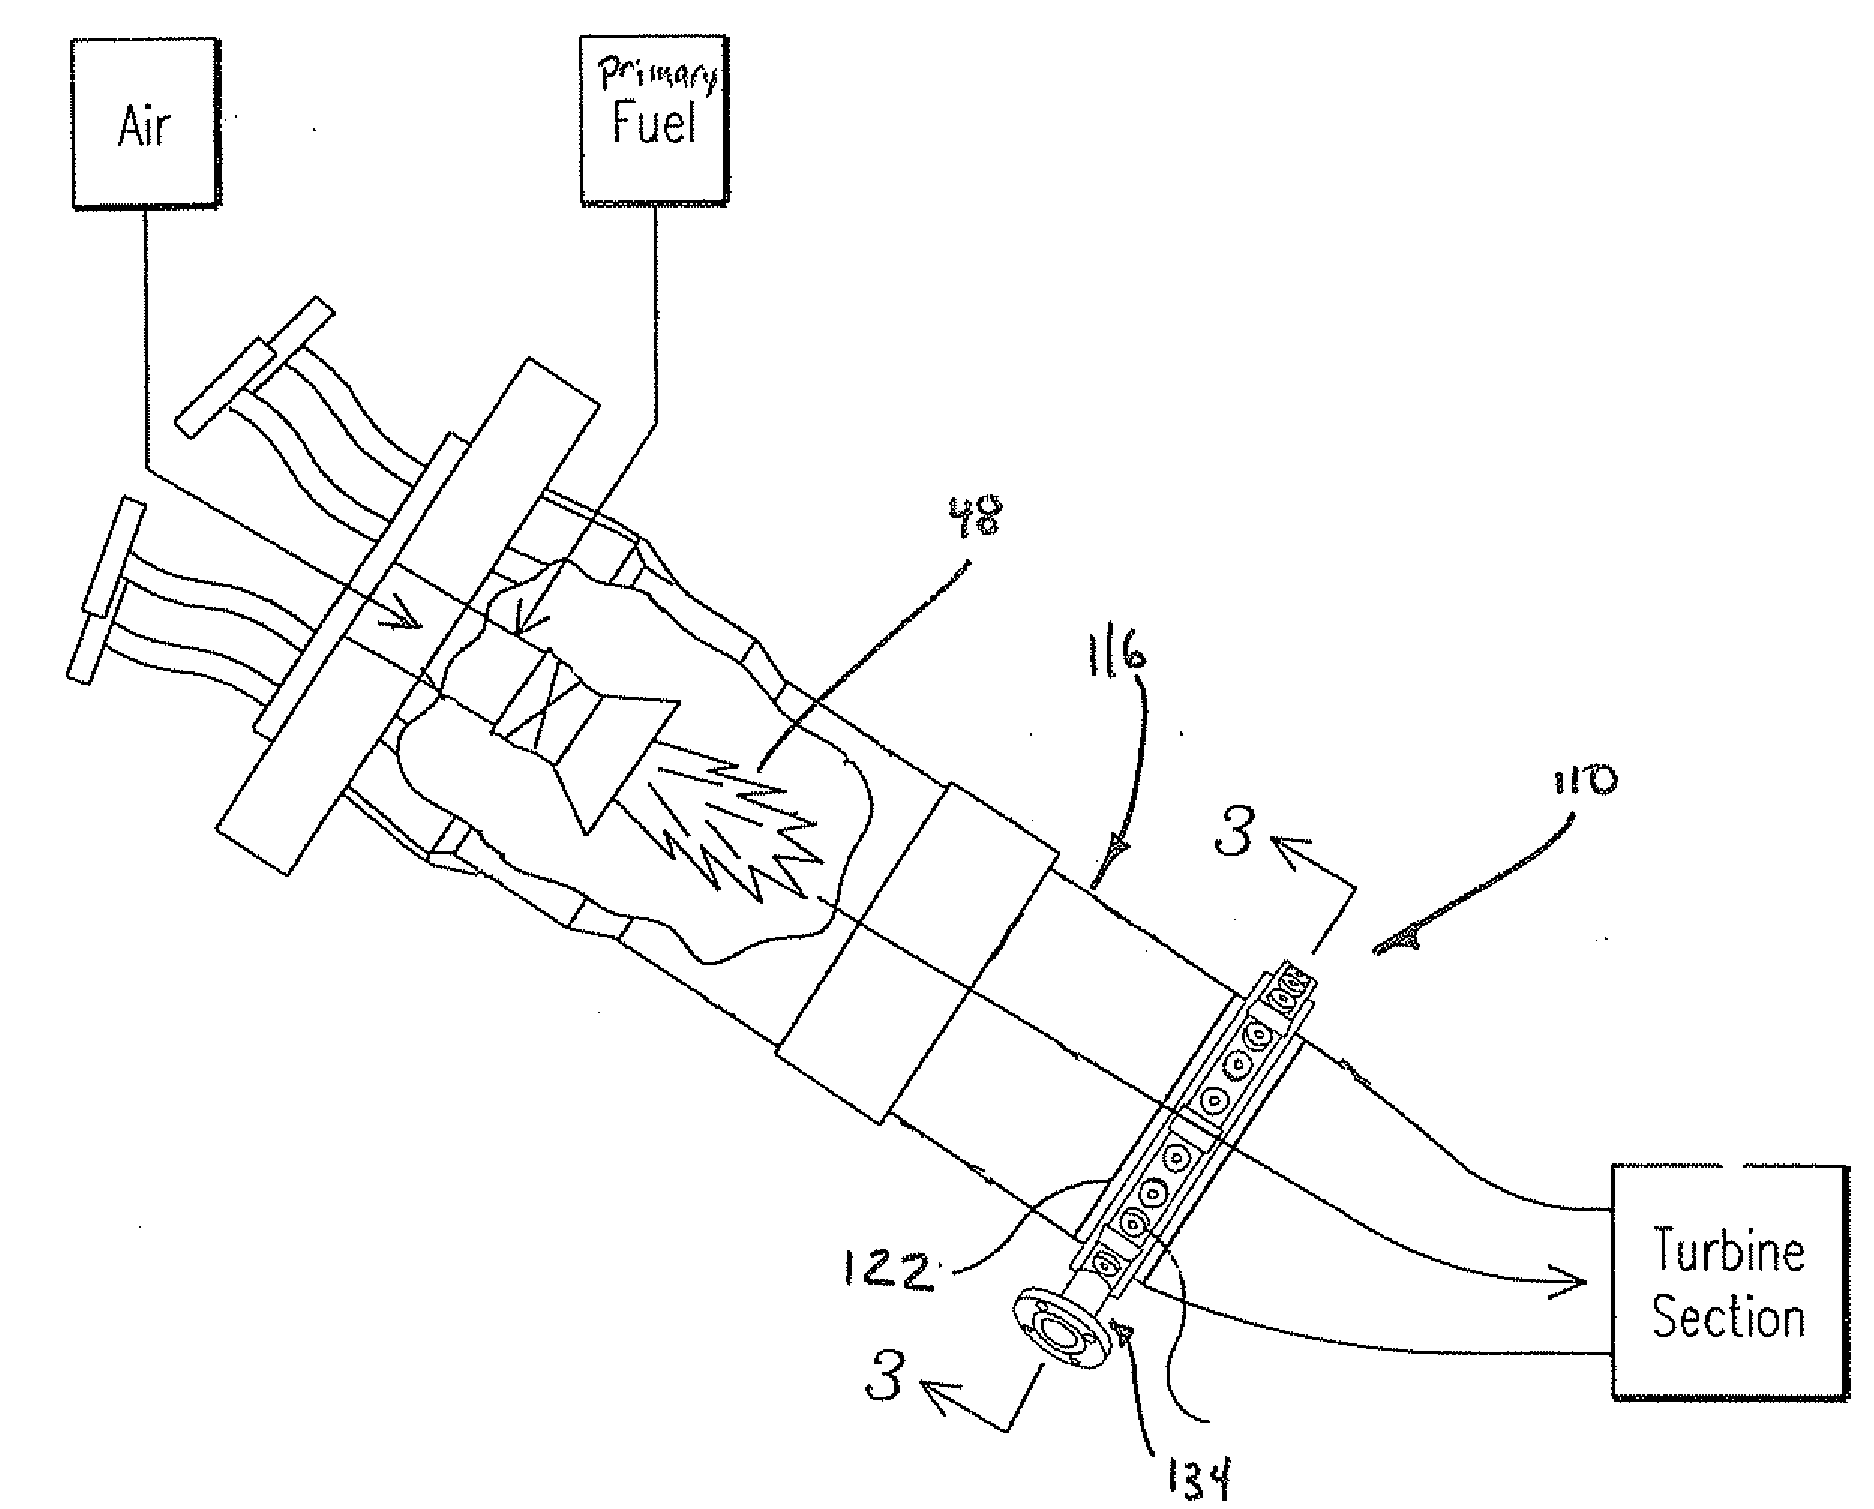 Secondary Fuel Delivery System